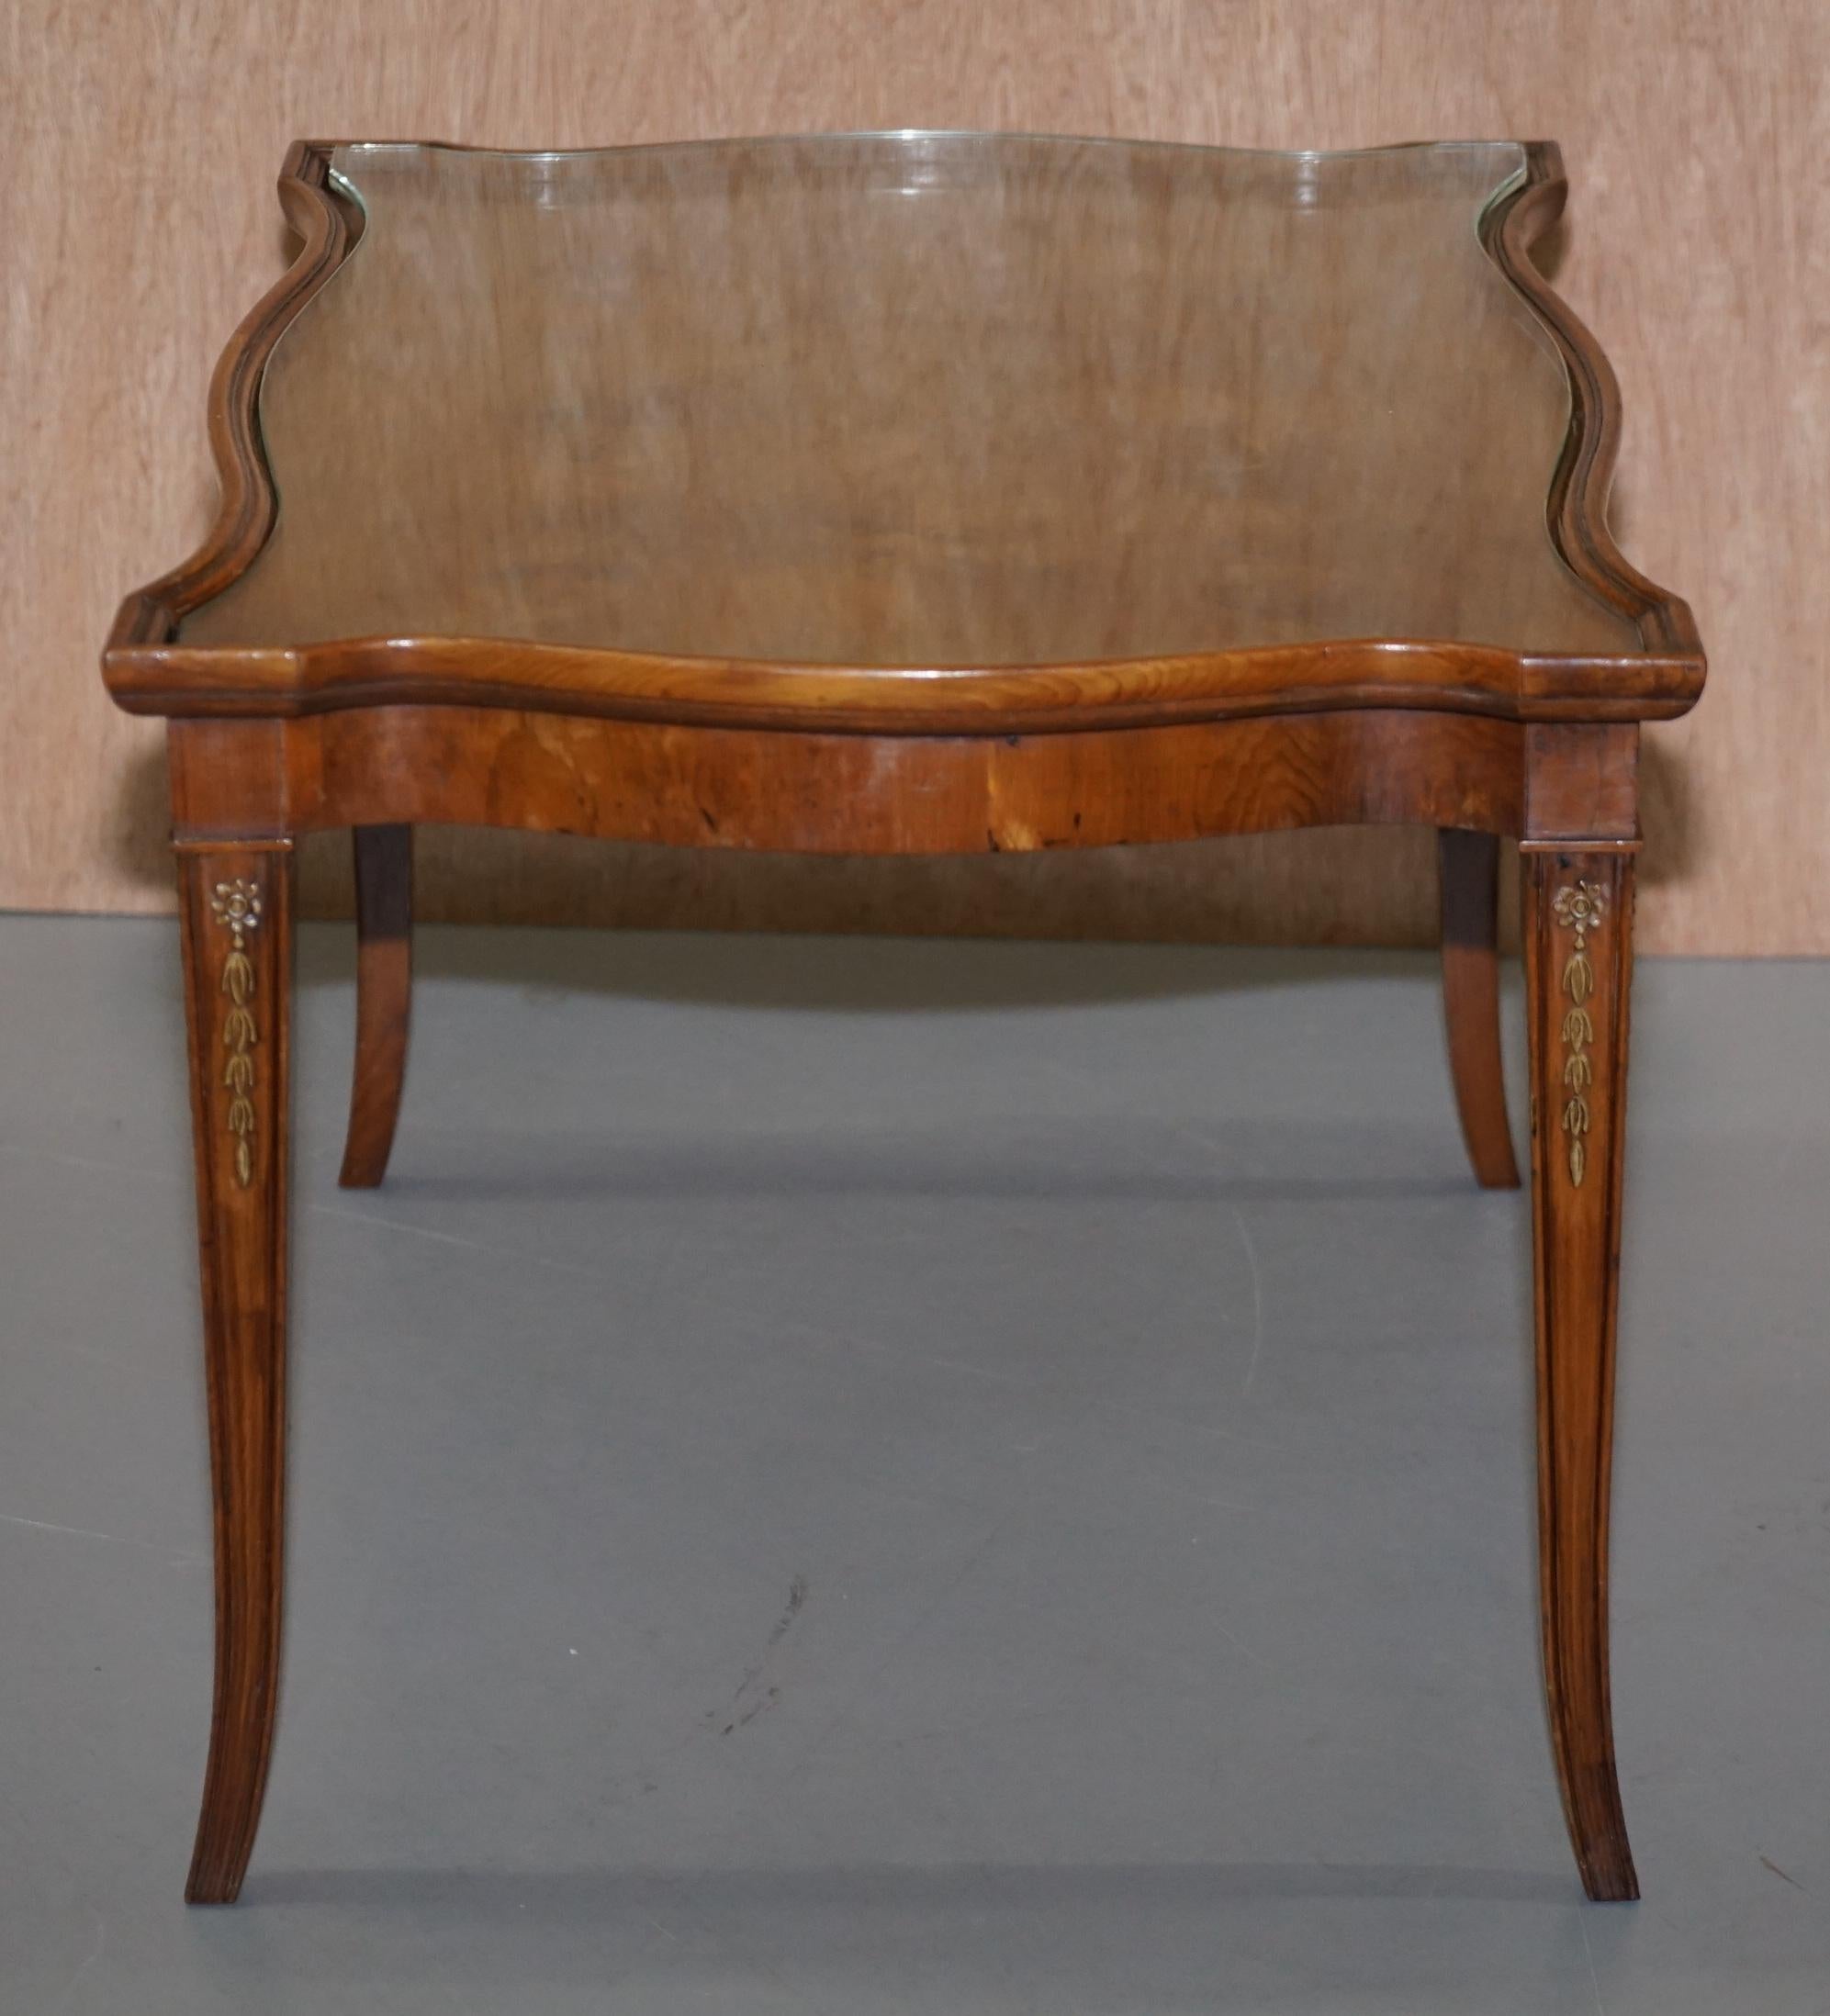 Pair of Burr Yew Wood Ornately Crafted Side End Lamp Wine Tables, a Lovely Pair 1